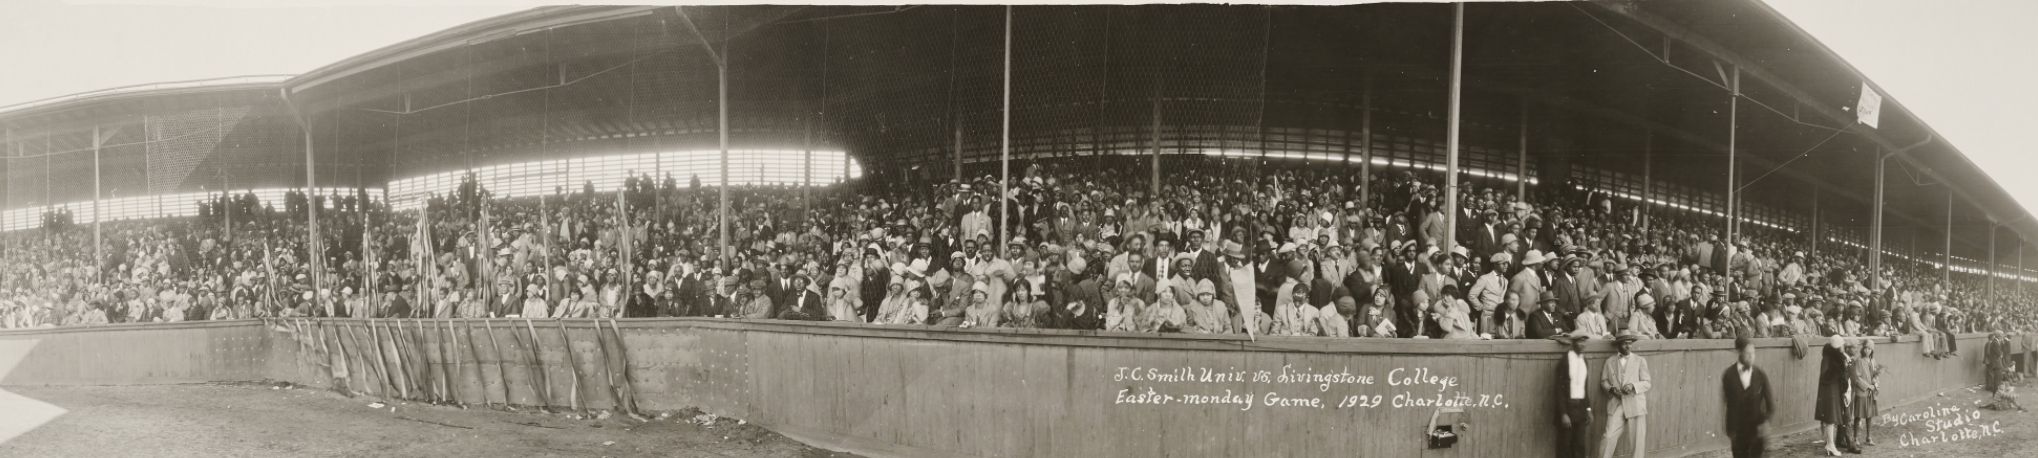 Panoramic photo of the crowd watching a baseball game from the stands. 